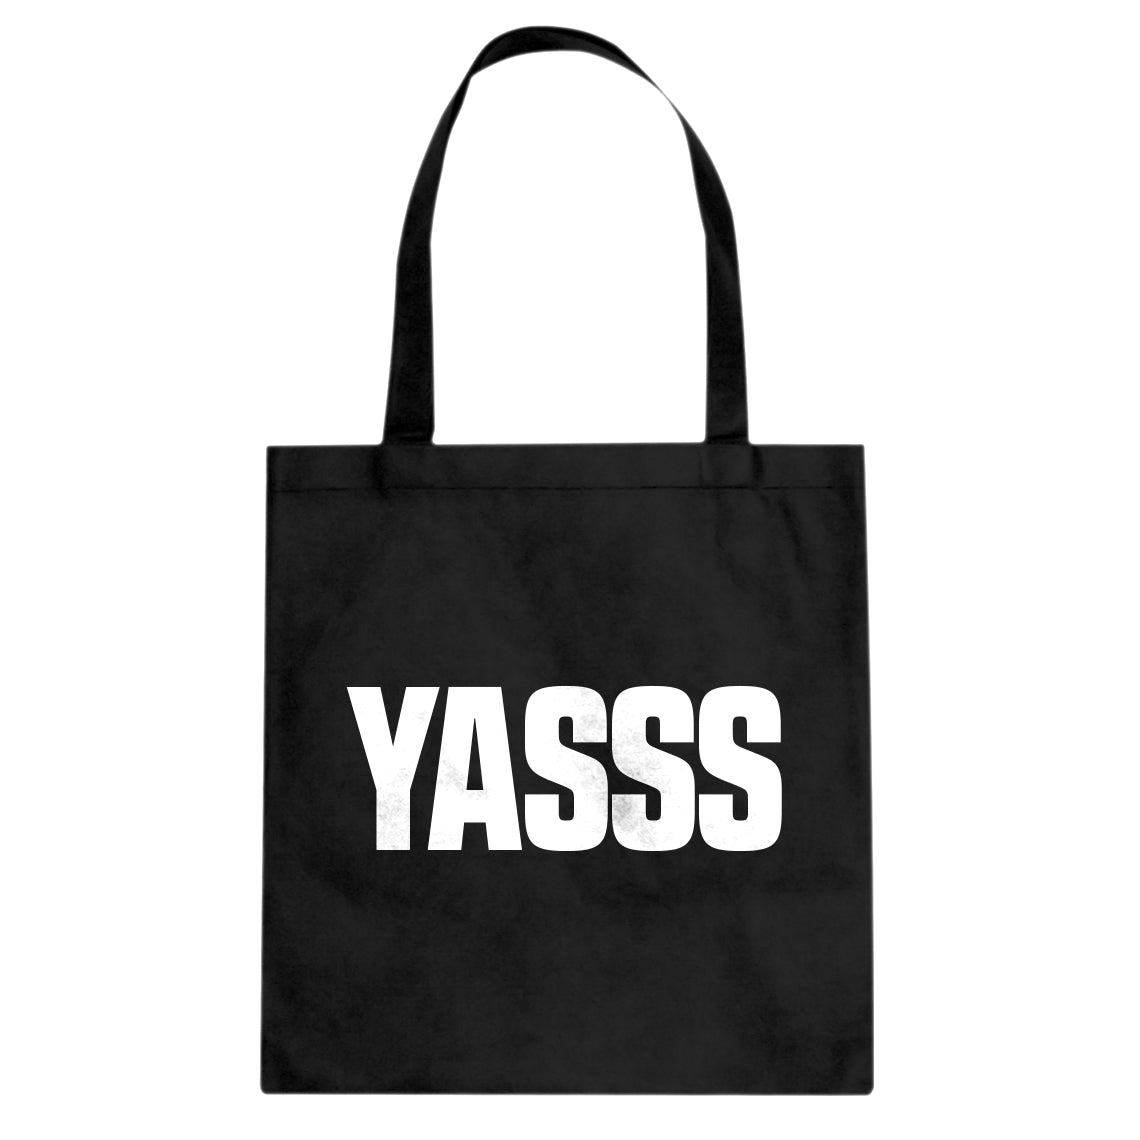 Tote Yasss Canvas Tote Bag